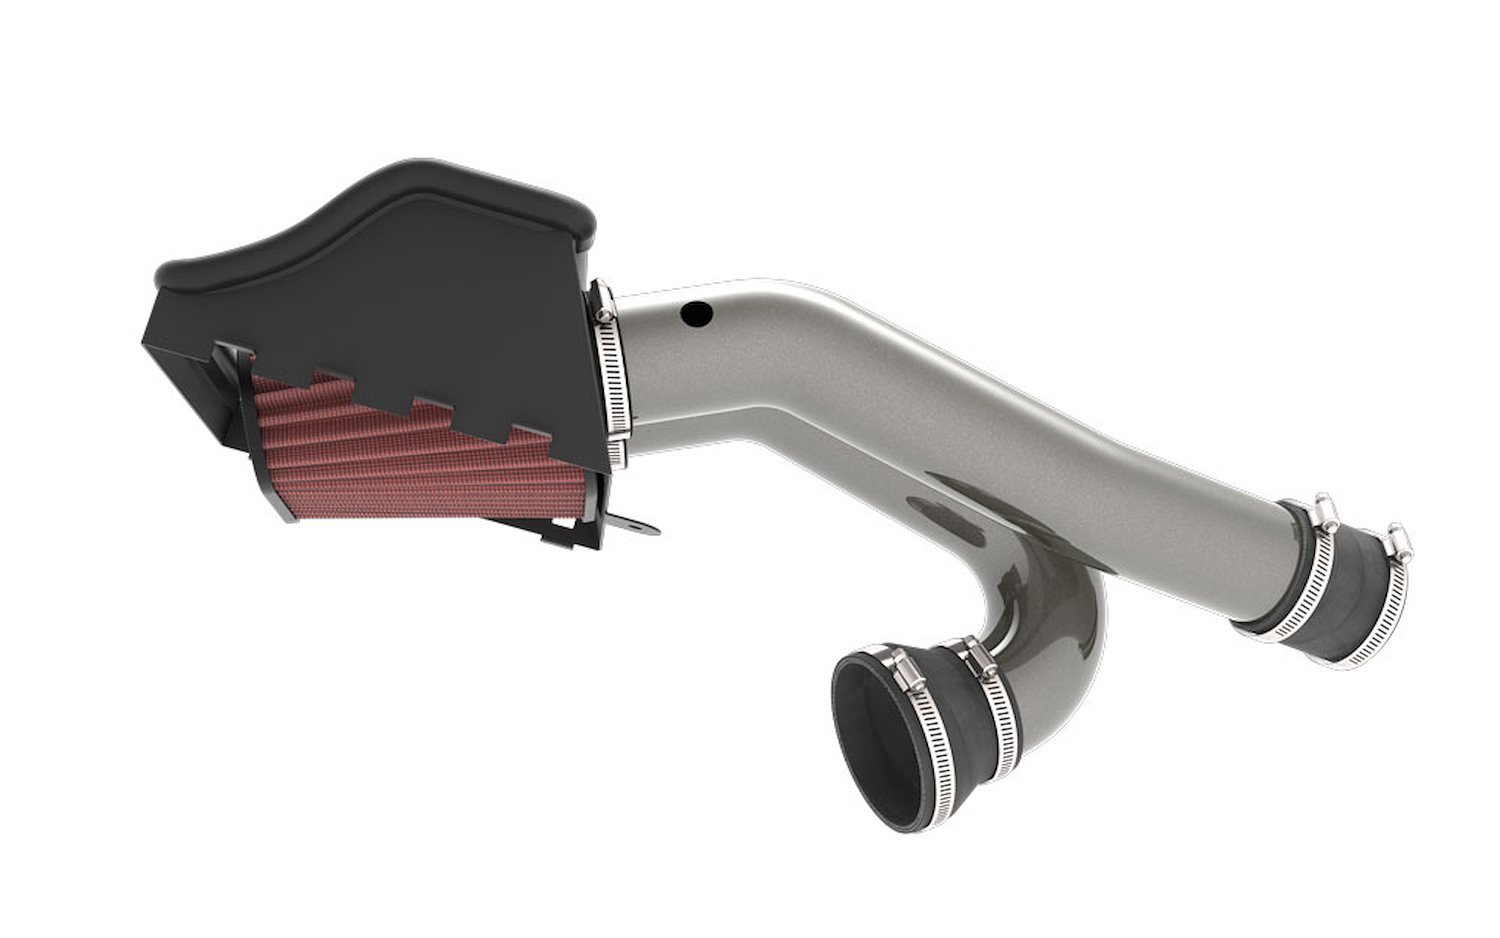 77-2617KC High-Flow Performance Air Intake System Fits Select Ford Expedition, F-150 2.7L/3.5L V6 Trucks